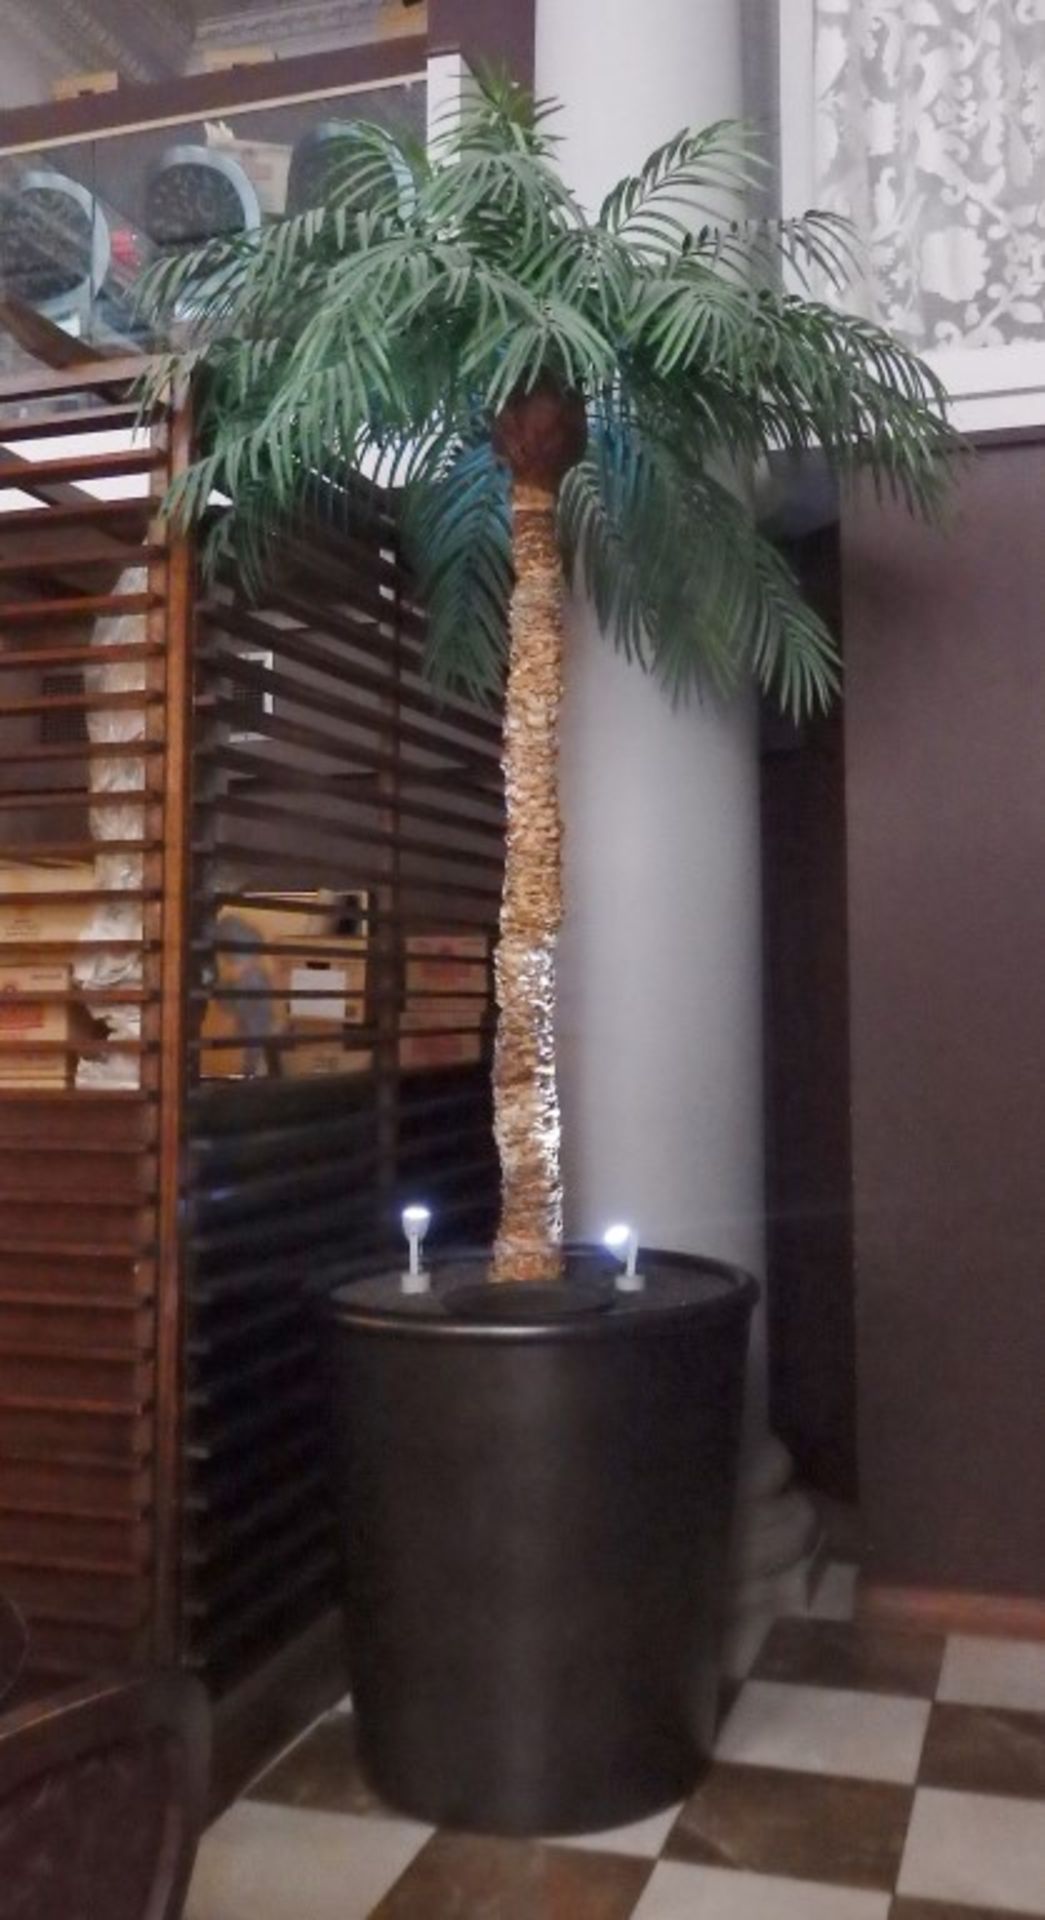 1 x Gigantic Artificial Tropical Palm Tree - HUGE SIZE - Approx 11ft Tall - With HUGE Illuminated